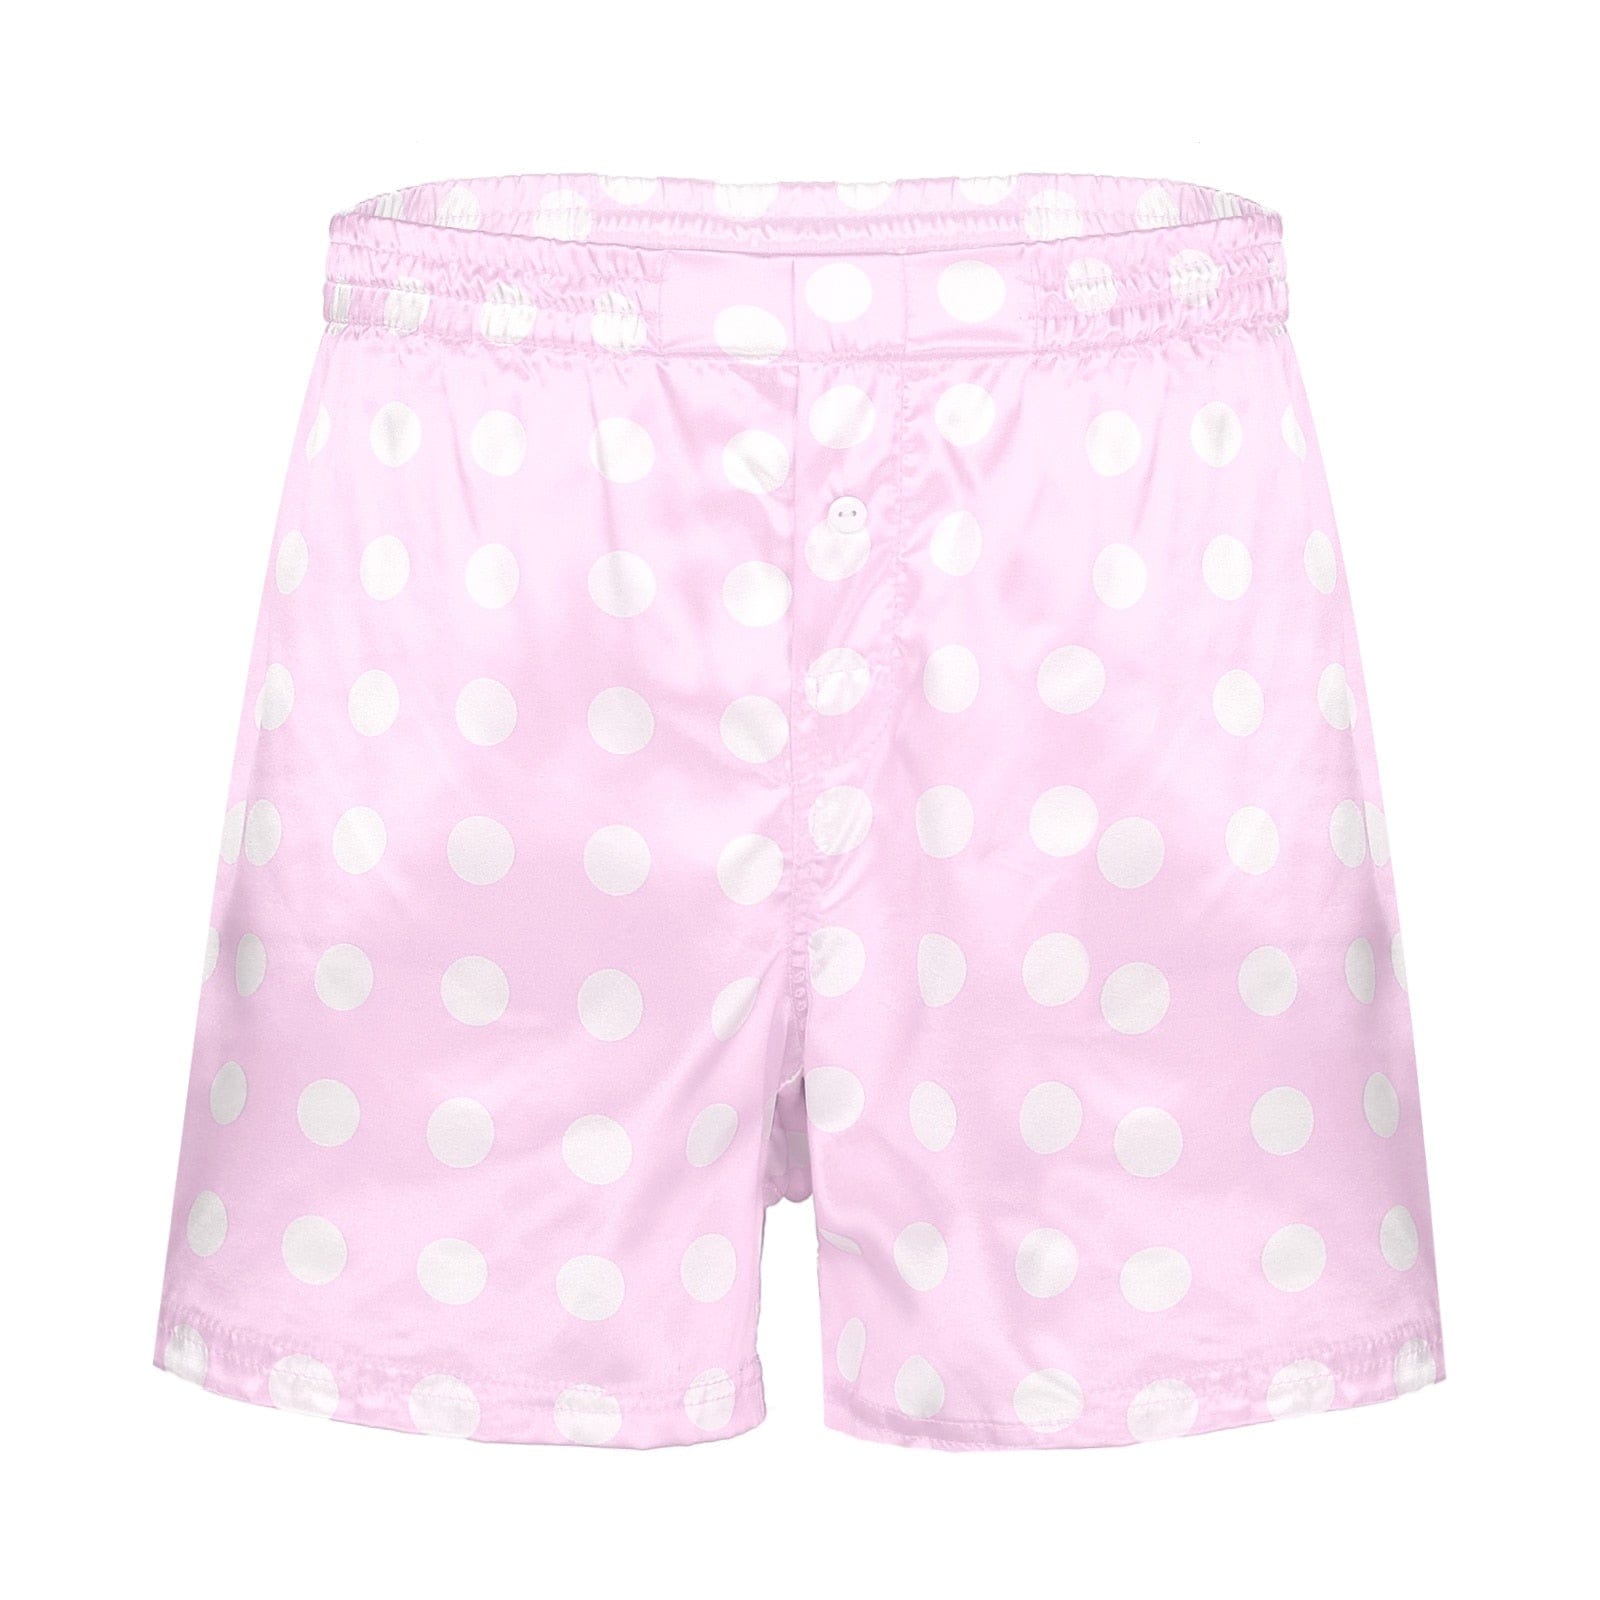 Kinky Cloth Pink / M Classic Printed Soft Boxer Shorts